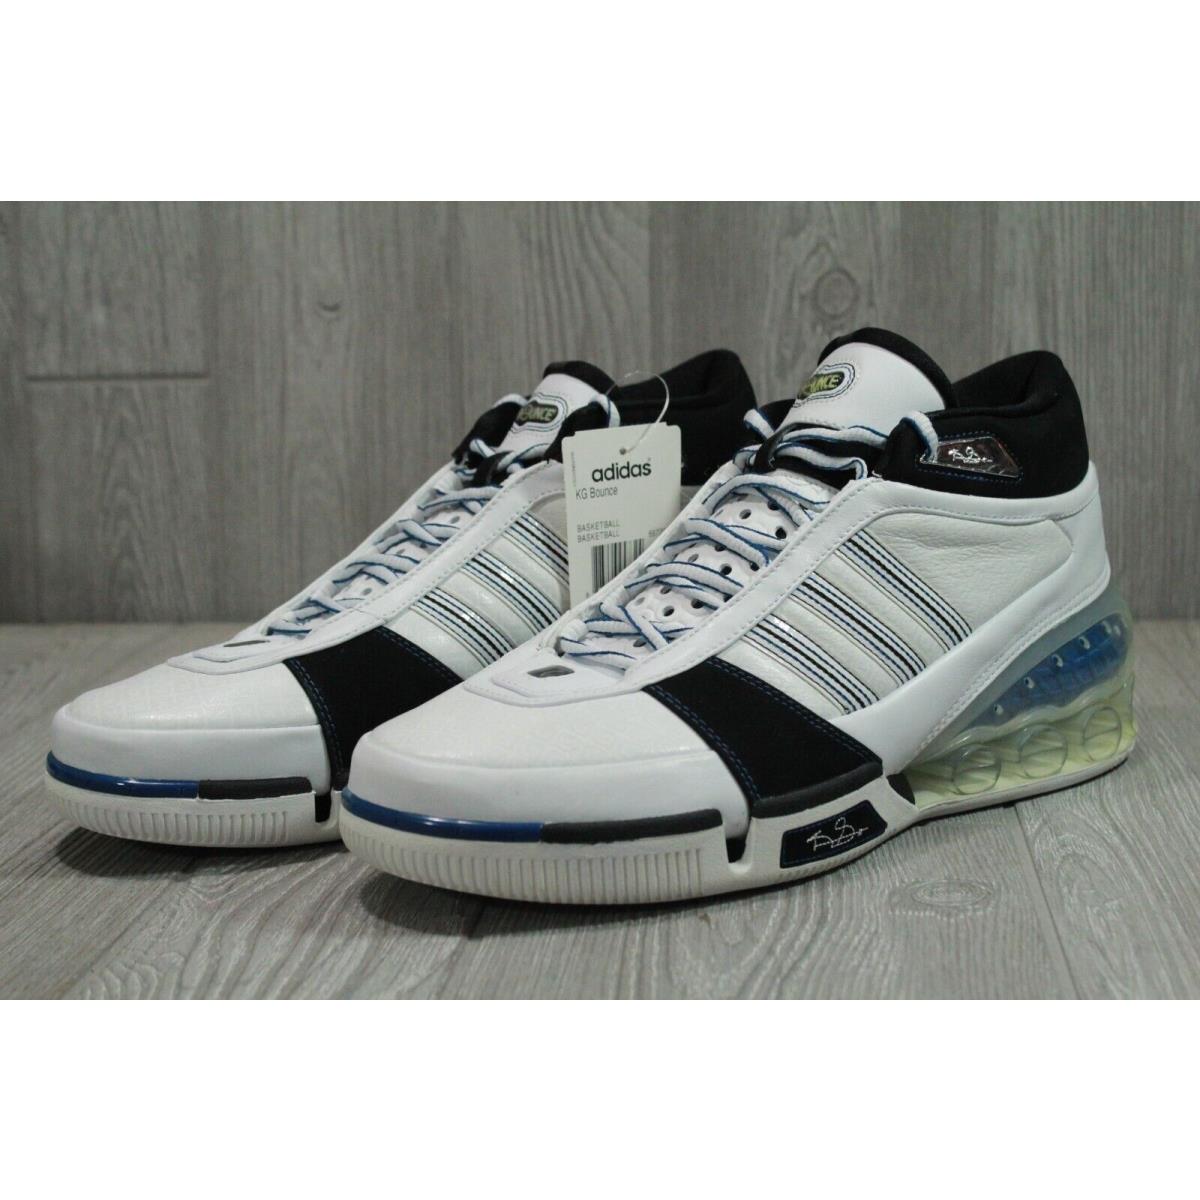 Adidas shoes Bounce - White 0